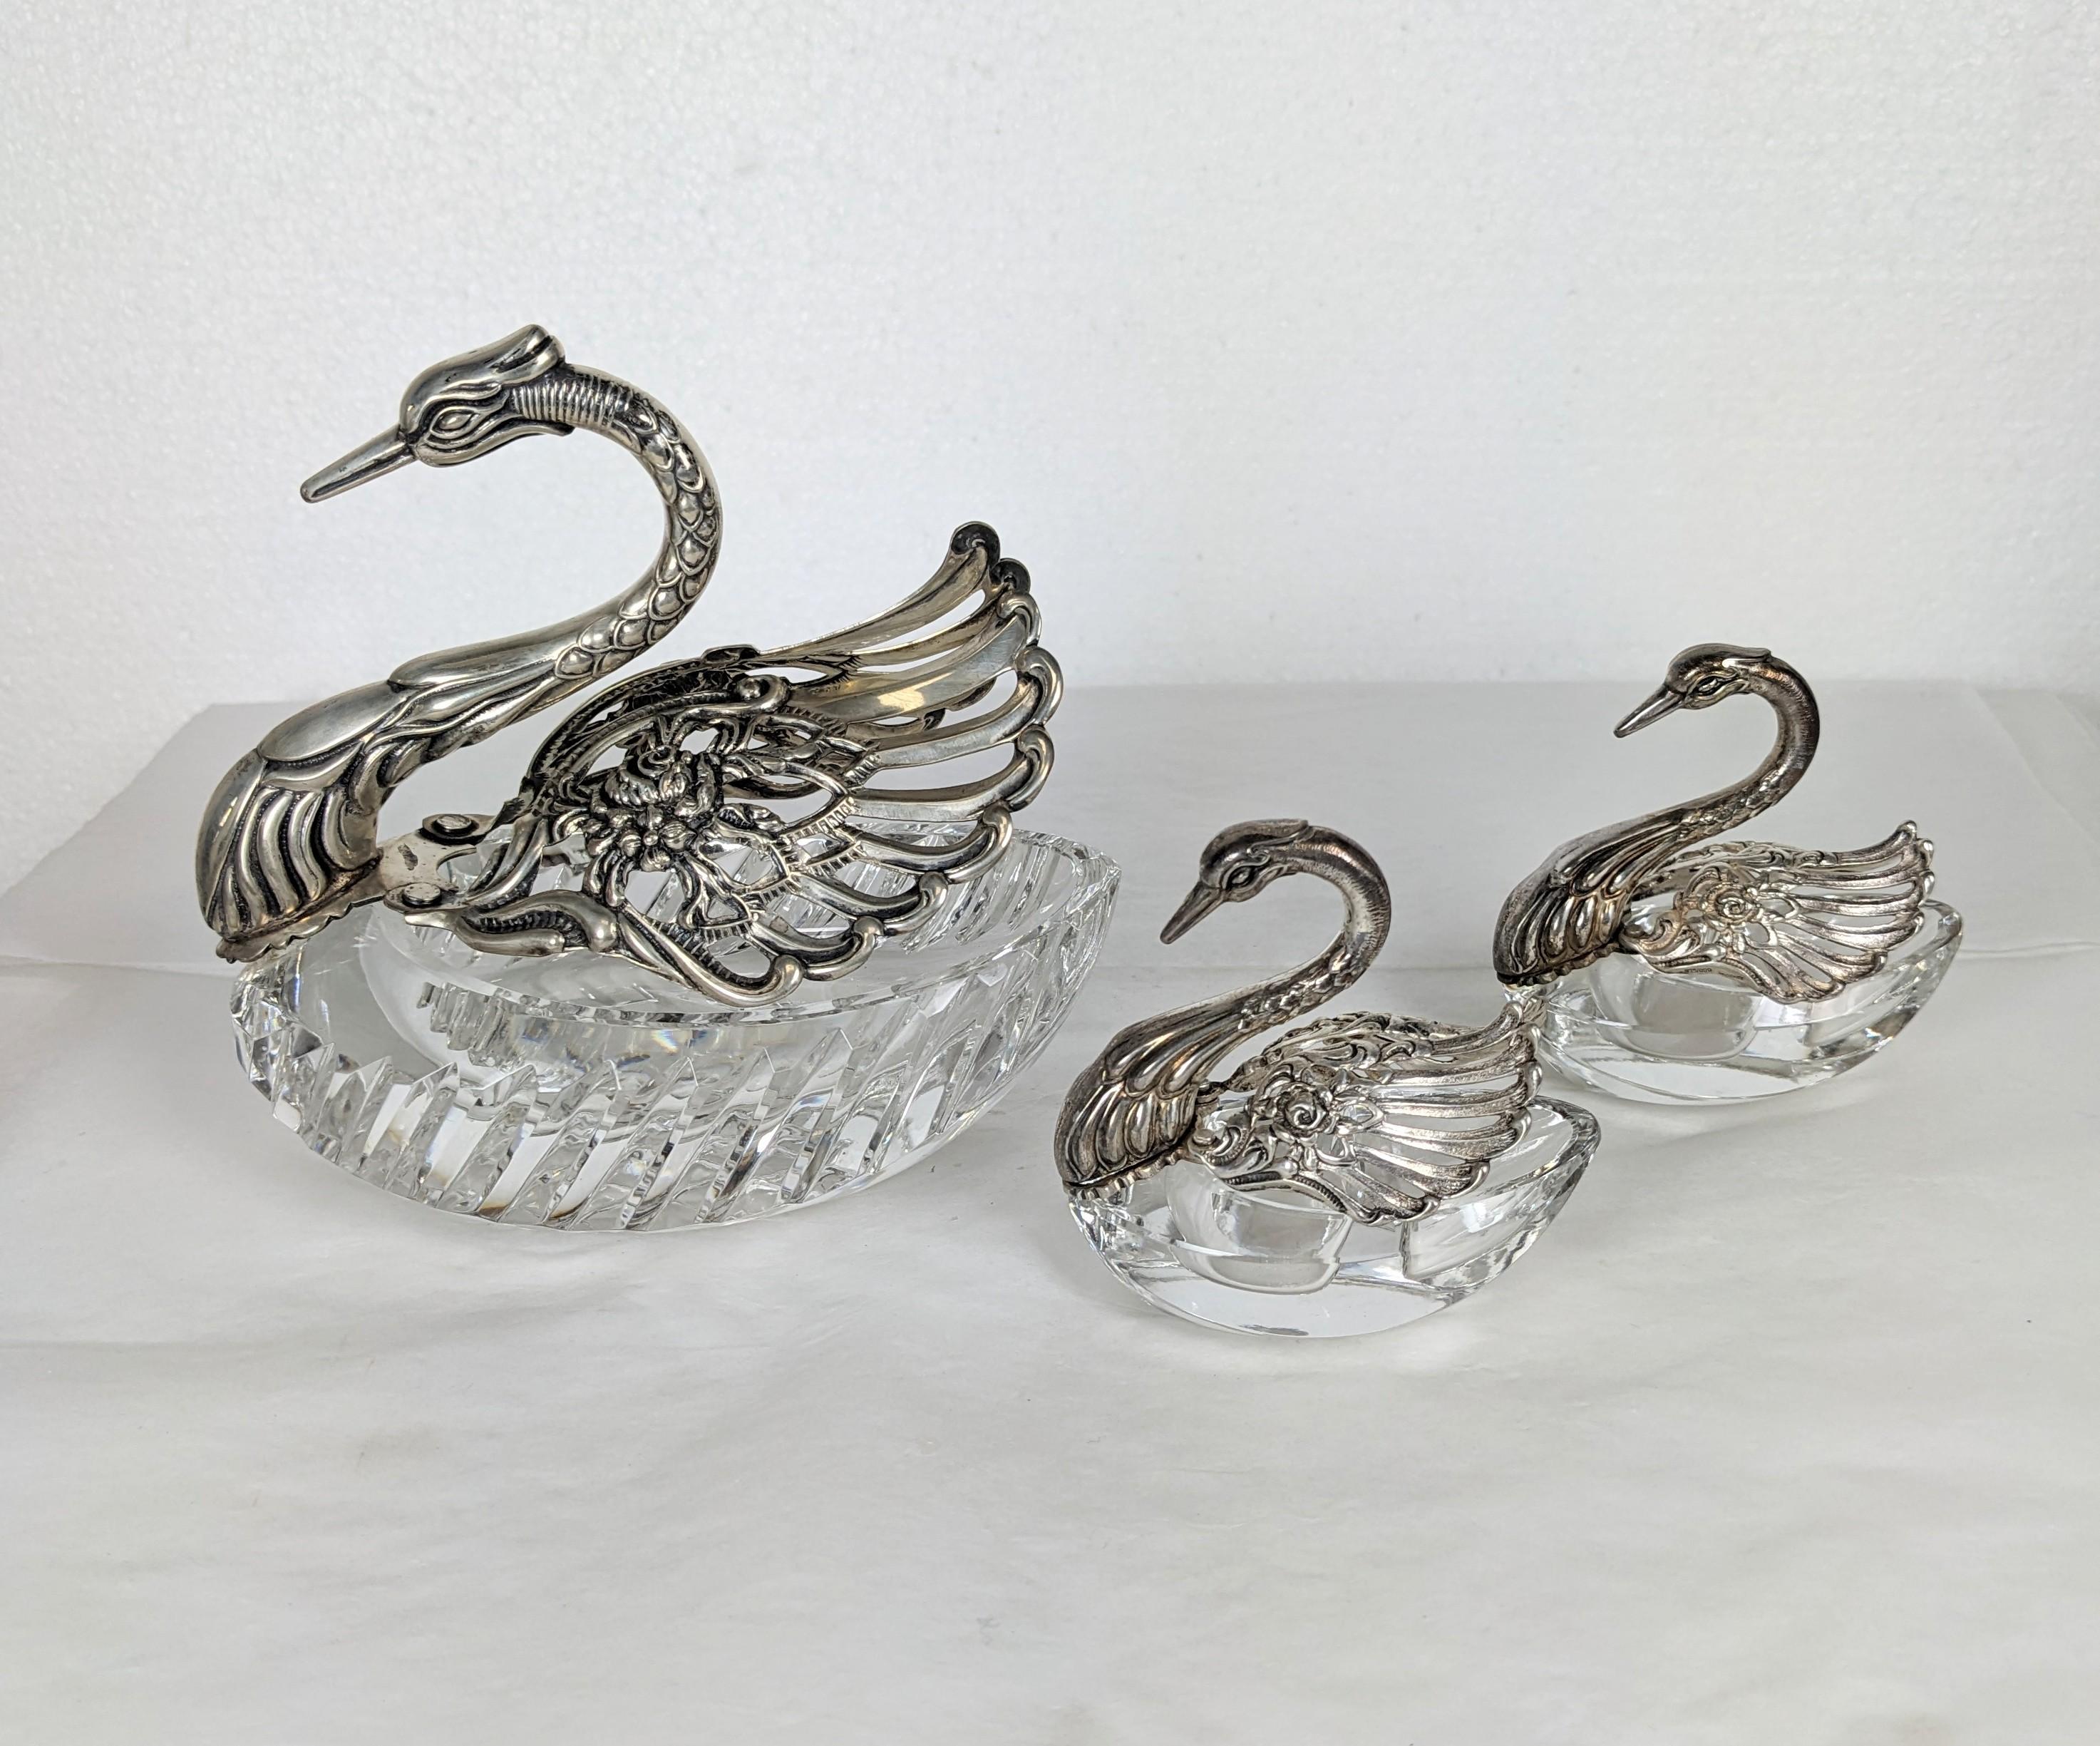 Set of 3 swan form salts from the early half of the 20th Century. One large master salt with 2 smaller salts with crystal bases and 835 grade pierced silver wings decorated with roses. The smaller salts are divided with salt and pepper wells where